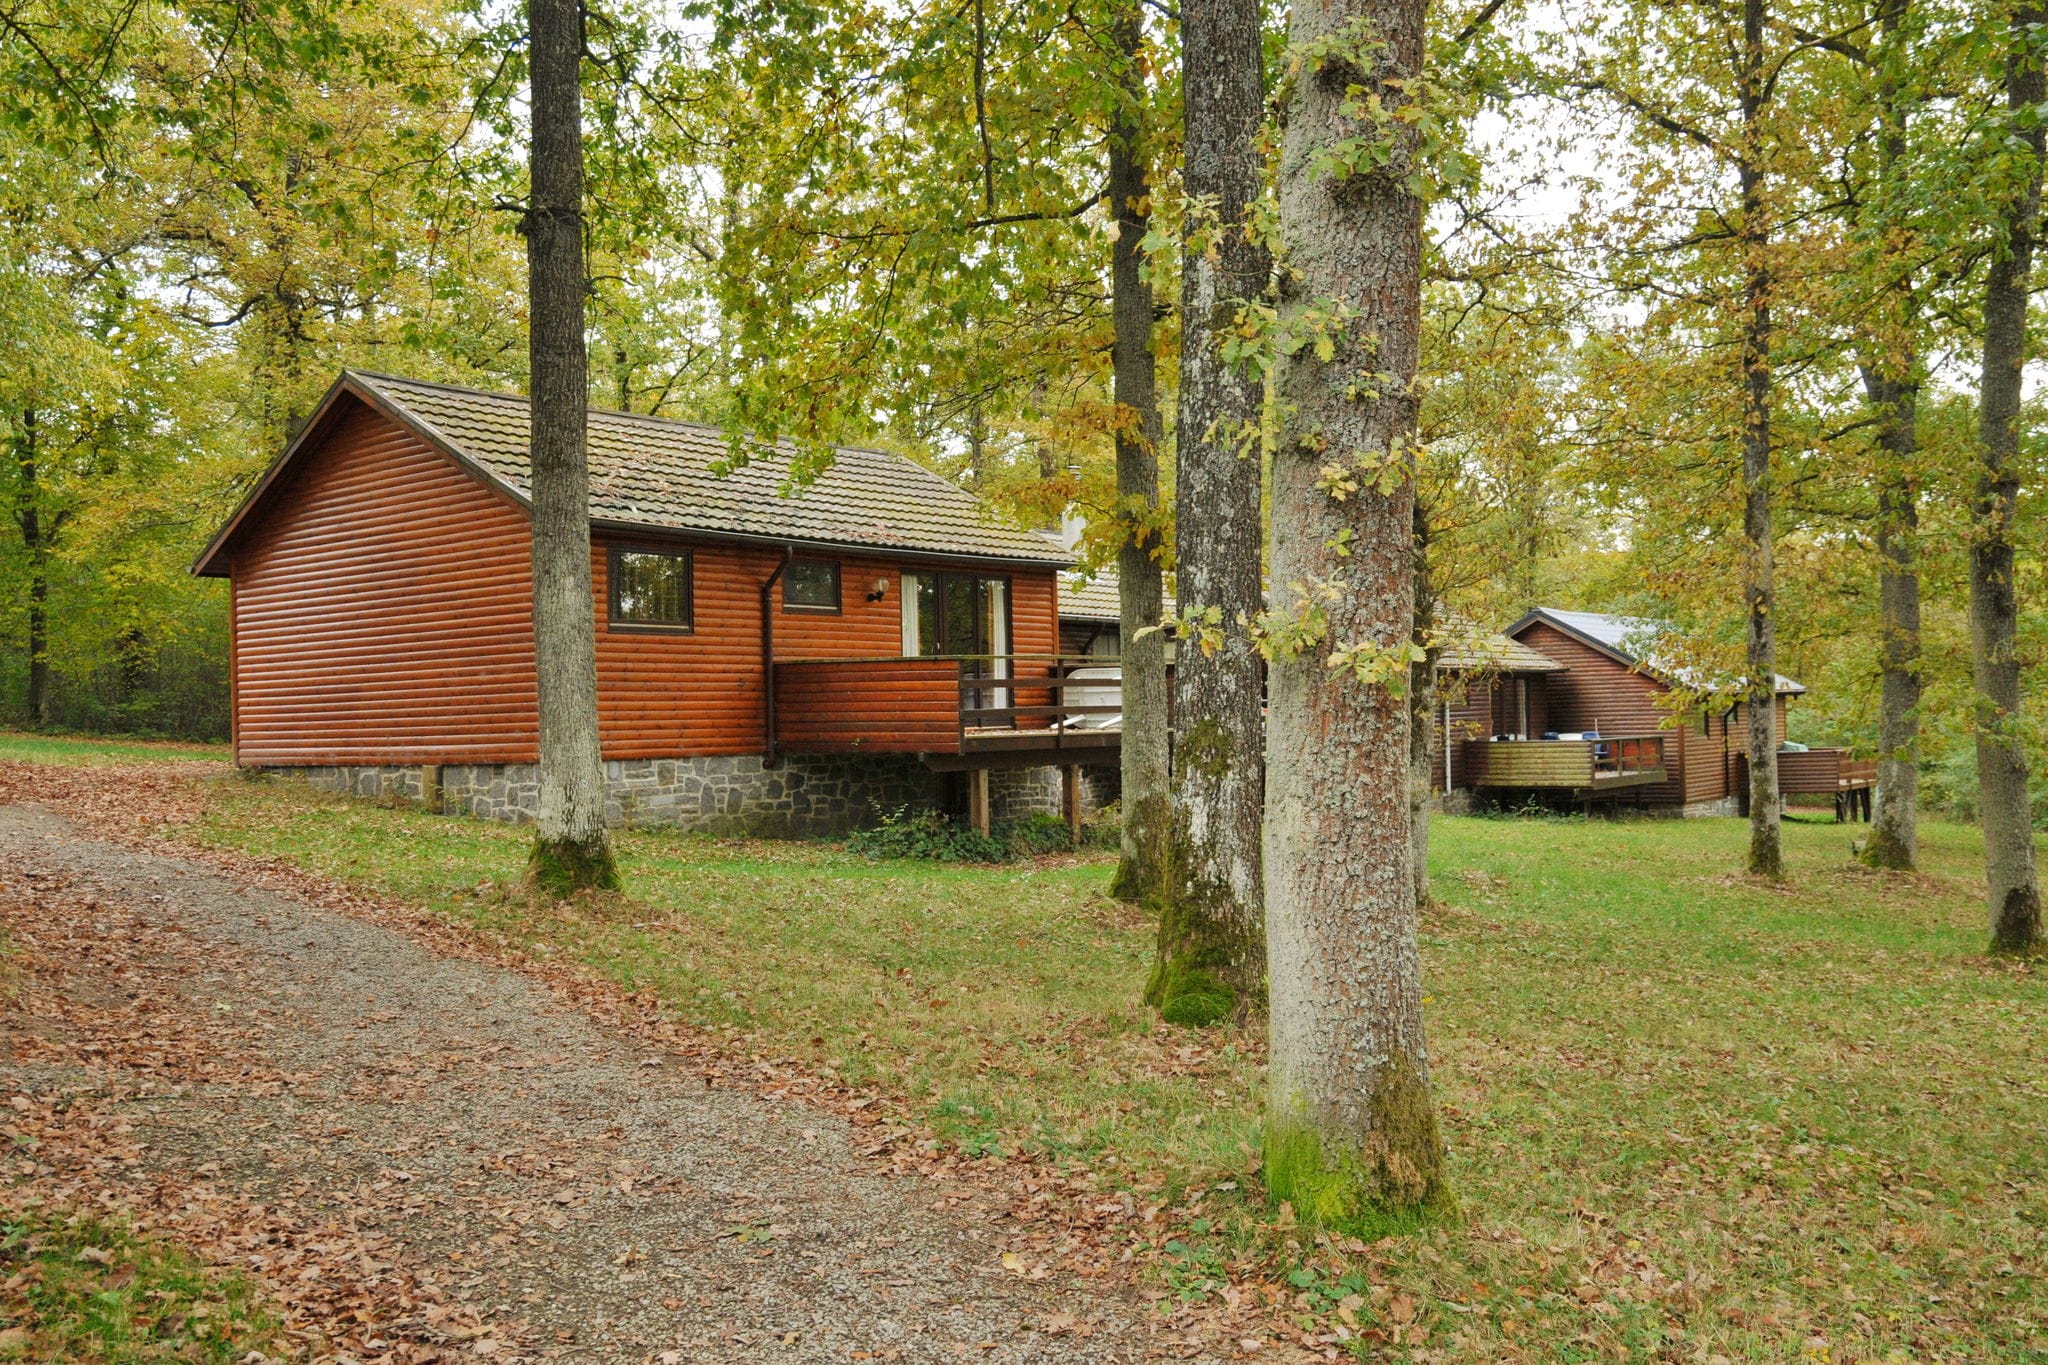 Cozy, wooden chalet with deck, just 15 km. from Durbuy